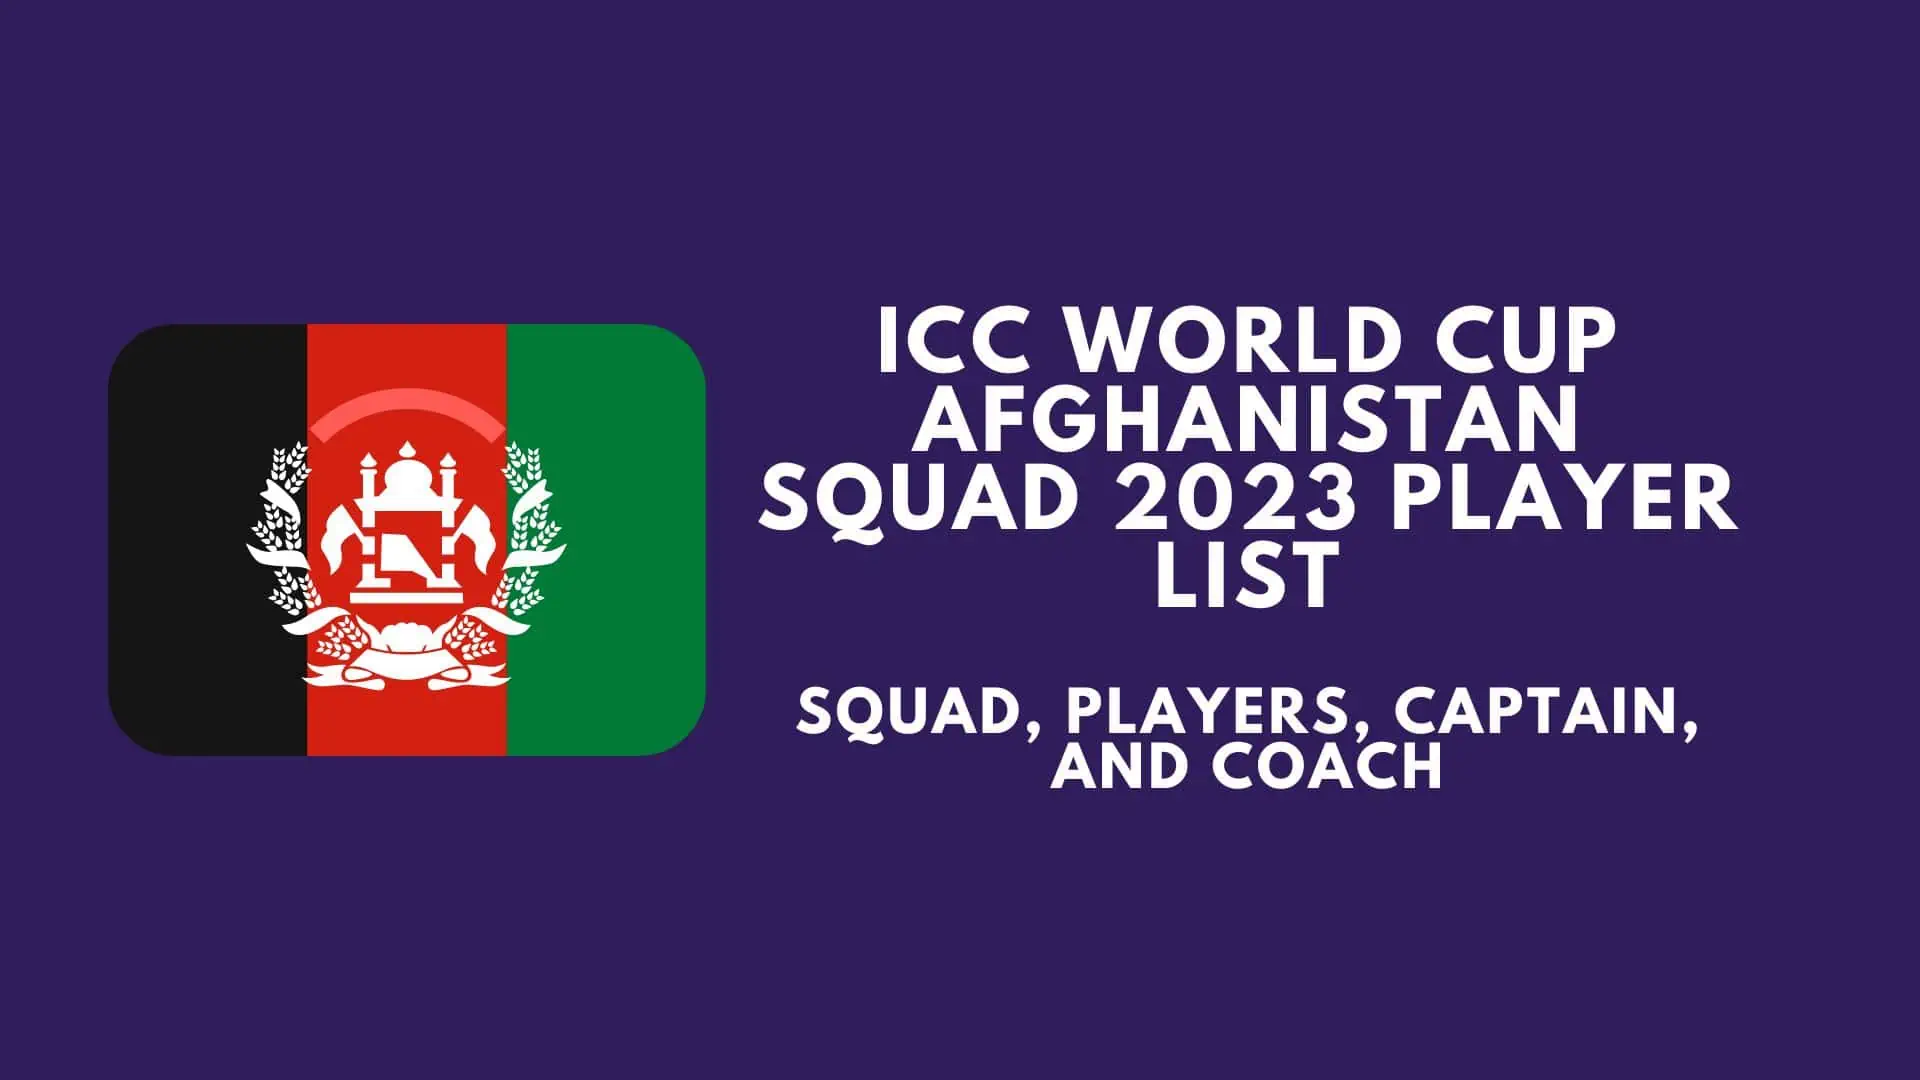 ICC World Cup 2023 Afghanistan Squad Player List, Captain and Coach